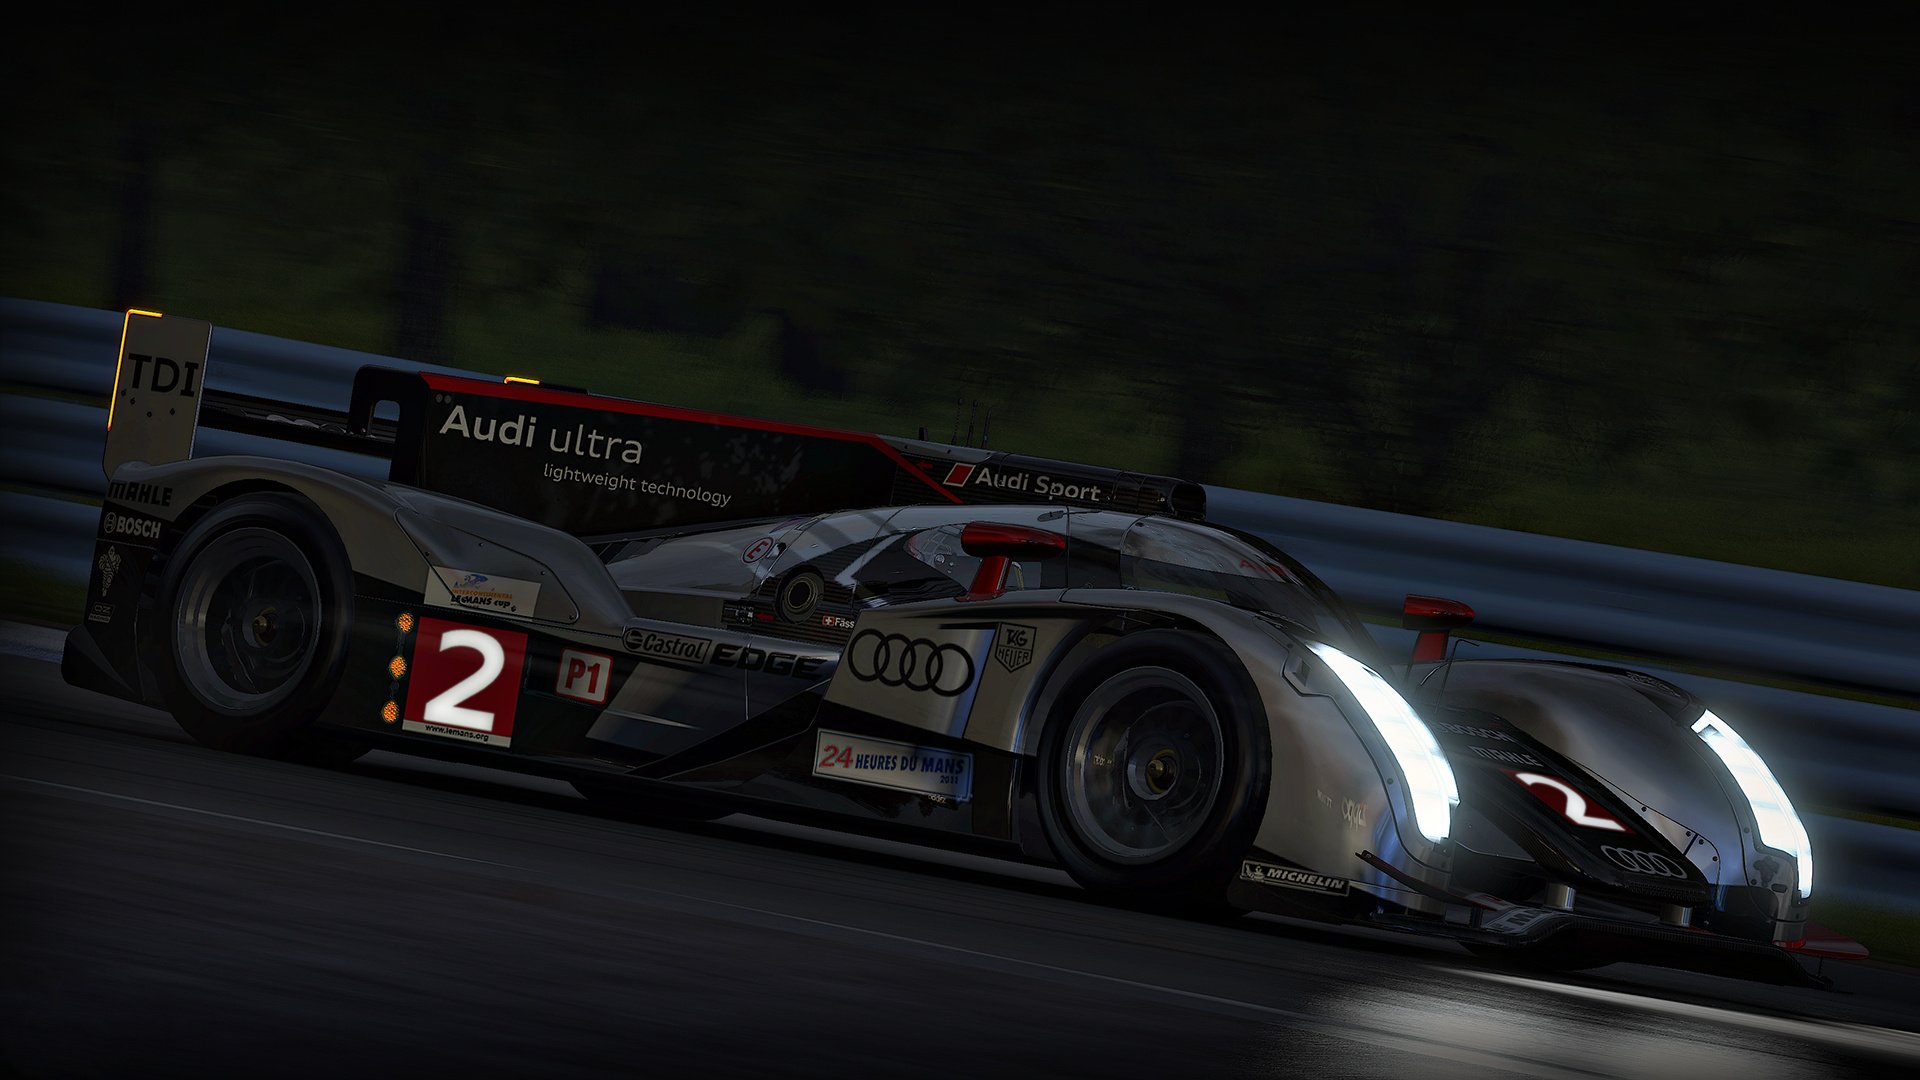 download free project cars ps4